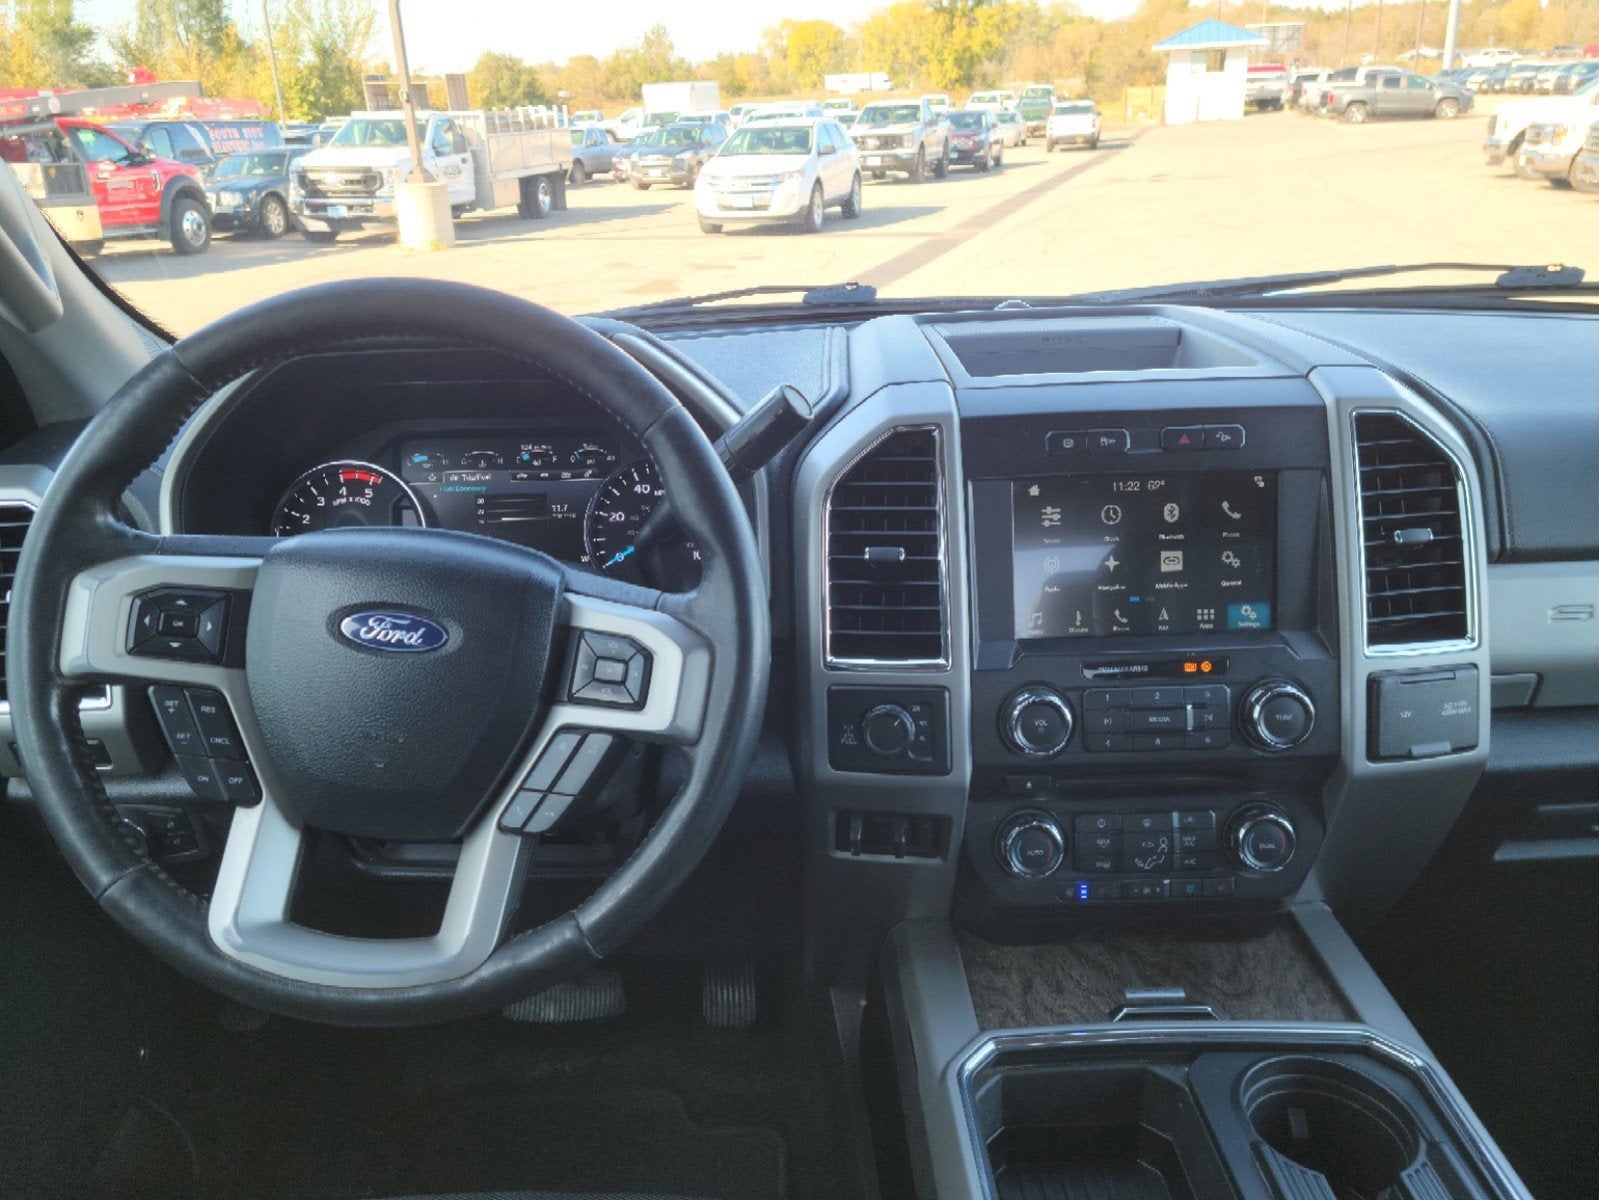 Used 2018 Ford F-350 Super Duty Lariat with VIN 1FT8W3BT1JEB89675 for sale in Jordan, Minnesota